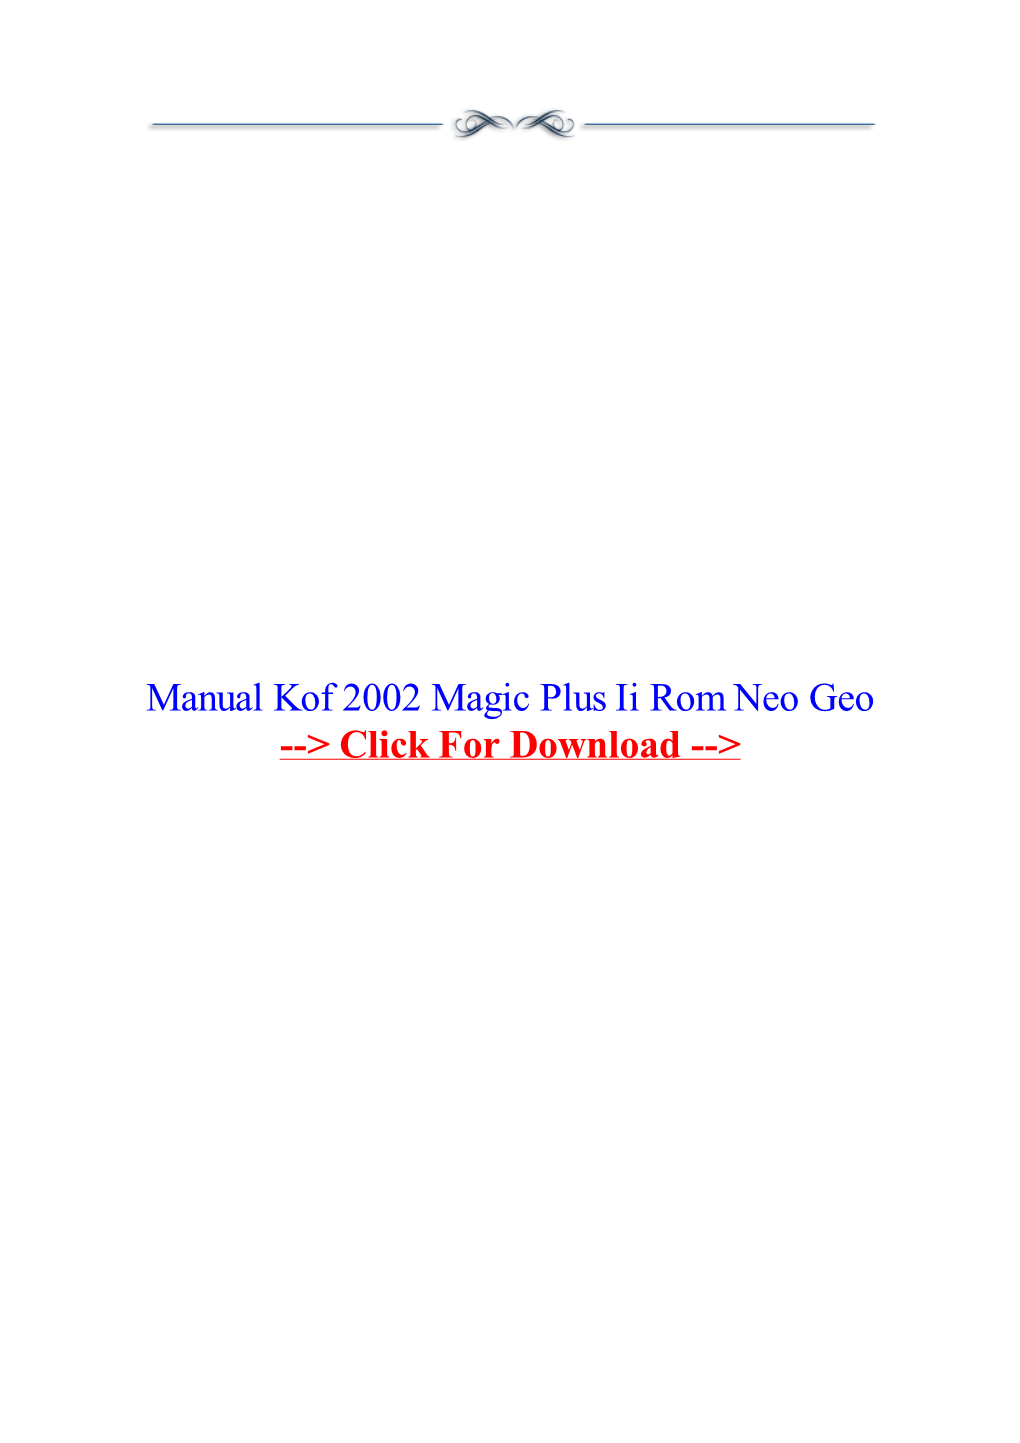 Manual Kof 2002 Magic Plus Ii Rom Neo Geo Rom the King of Fighters 2002 Magic Plus 2 Neo Geo.Rar (Full Version) See the Full List of Available M.A.M.E